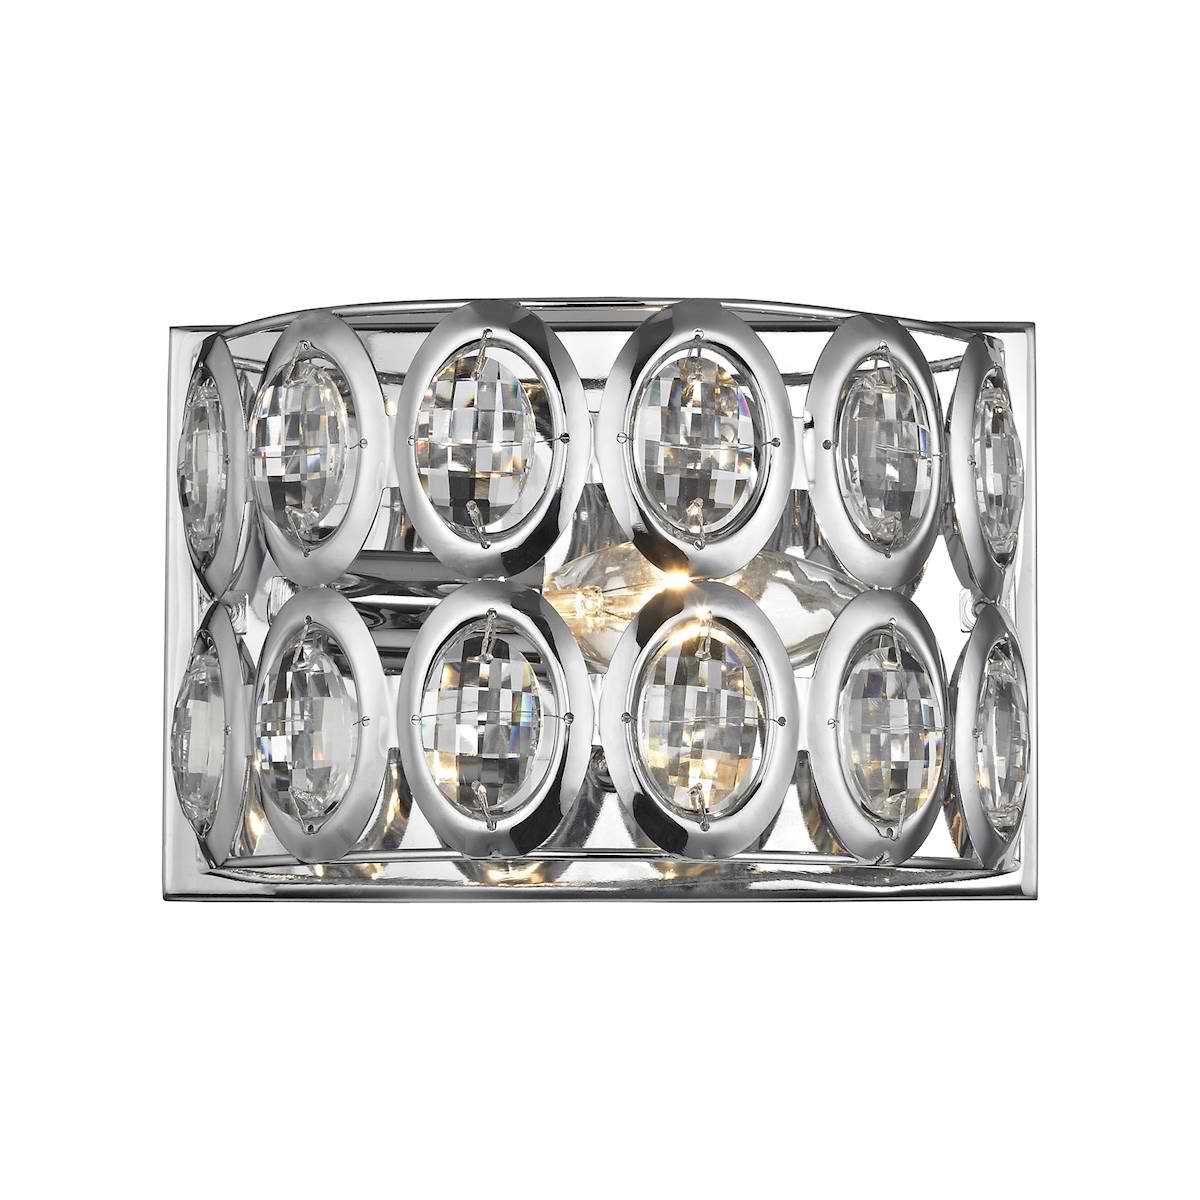 Tessa 1 Light Vanity in Polished Chrome with Clear Crystal